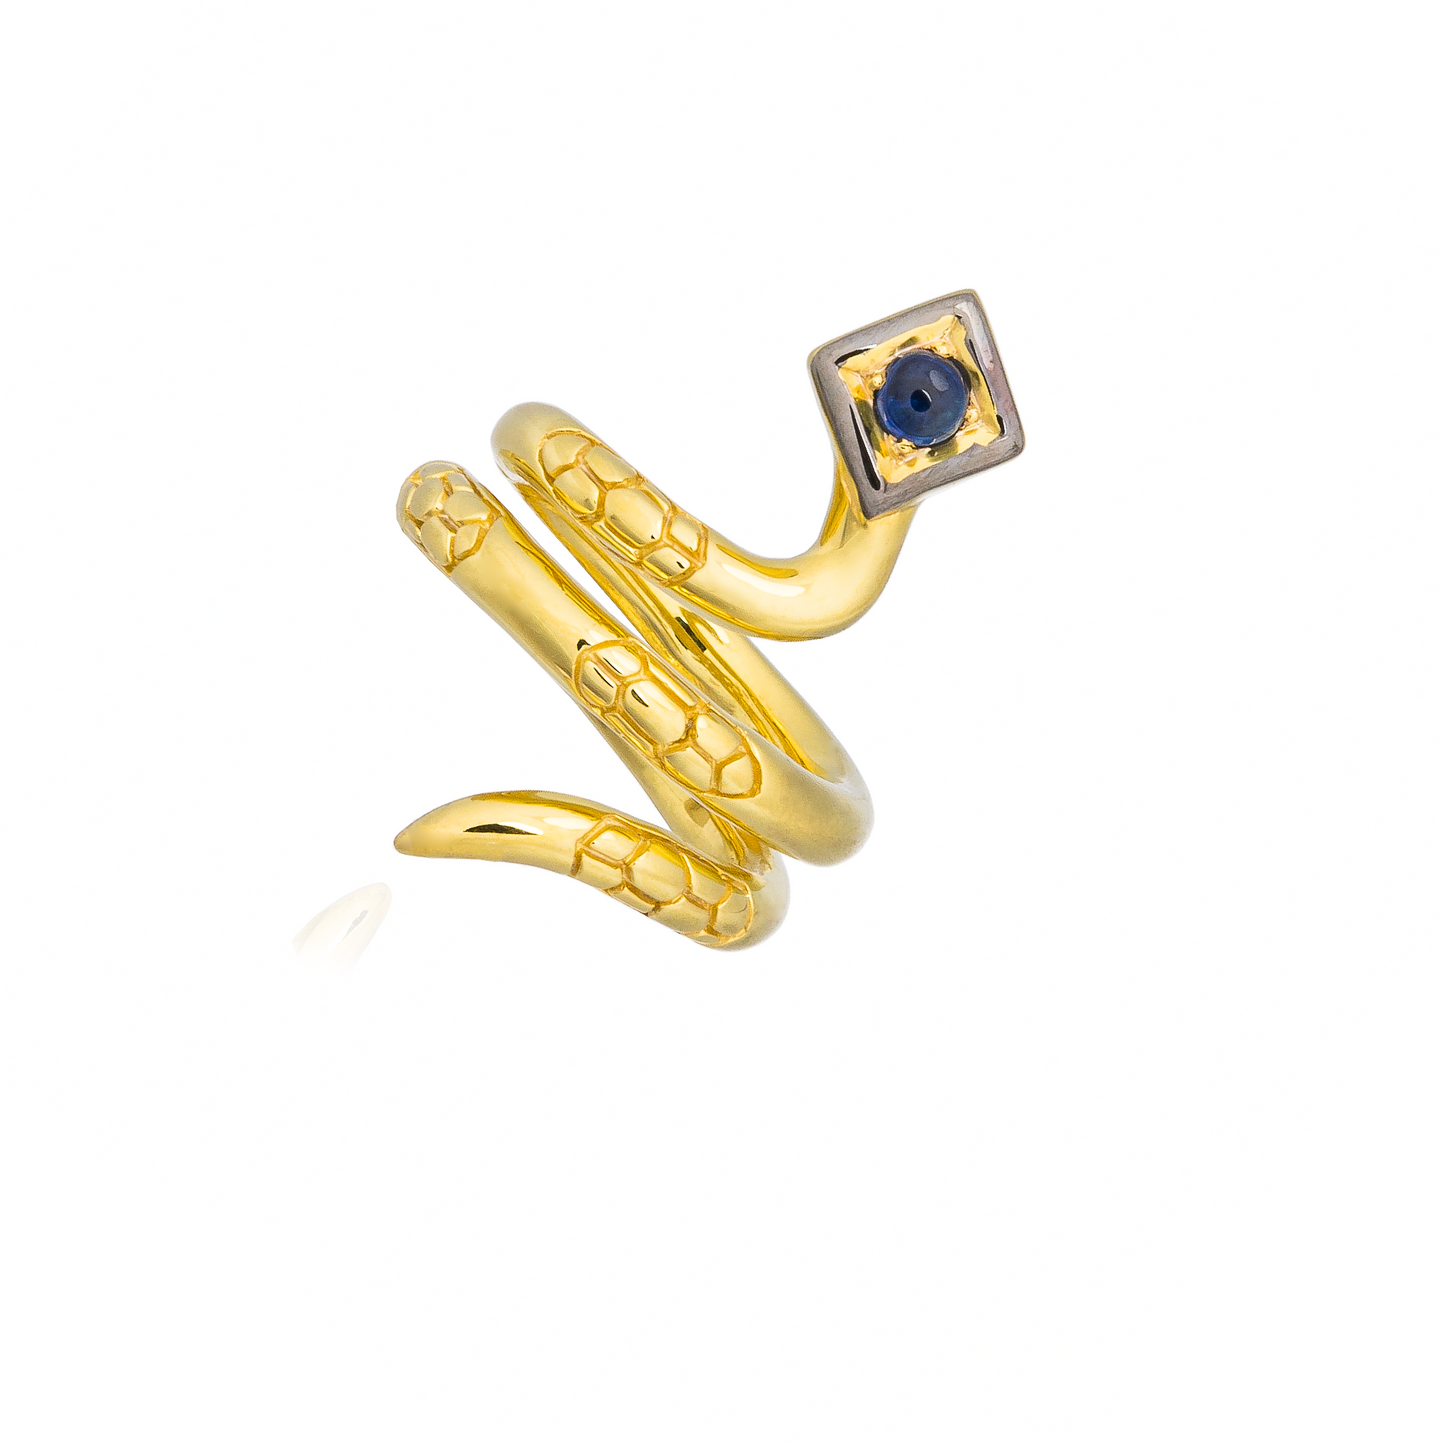 Serpentine 925 Silver Snake Ring with Blue Sapphire Cabouchon